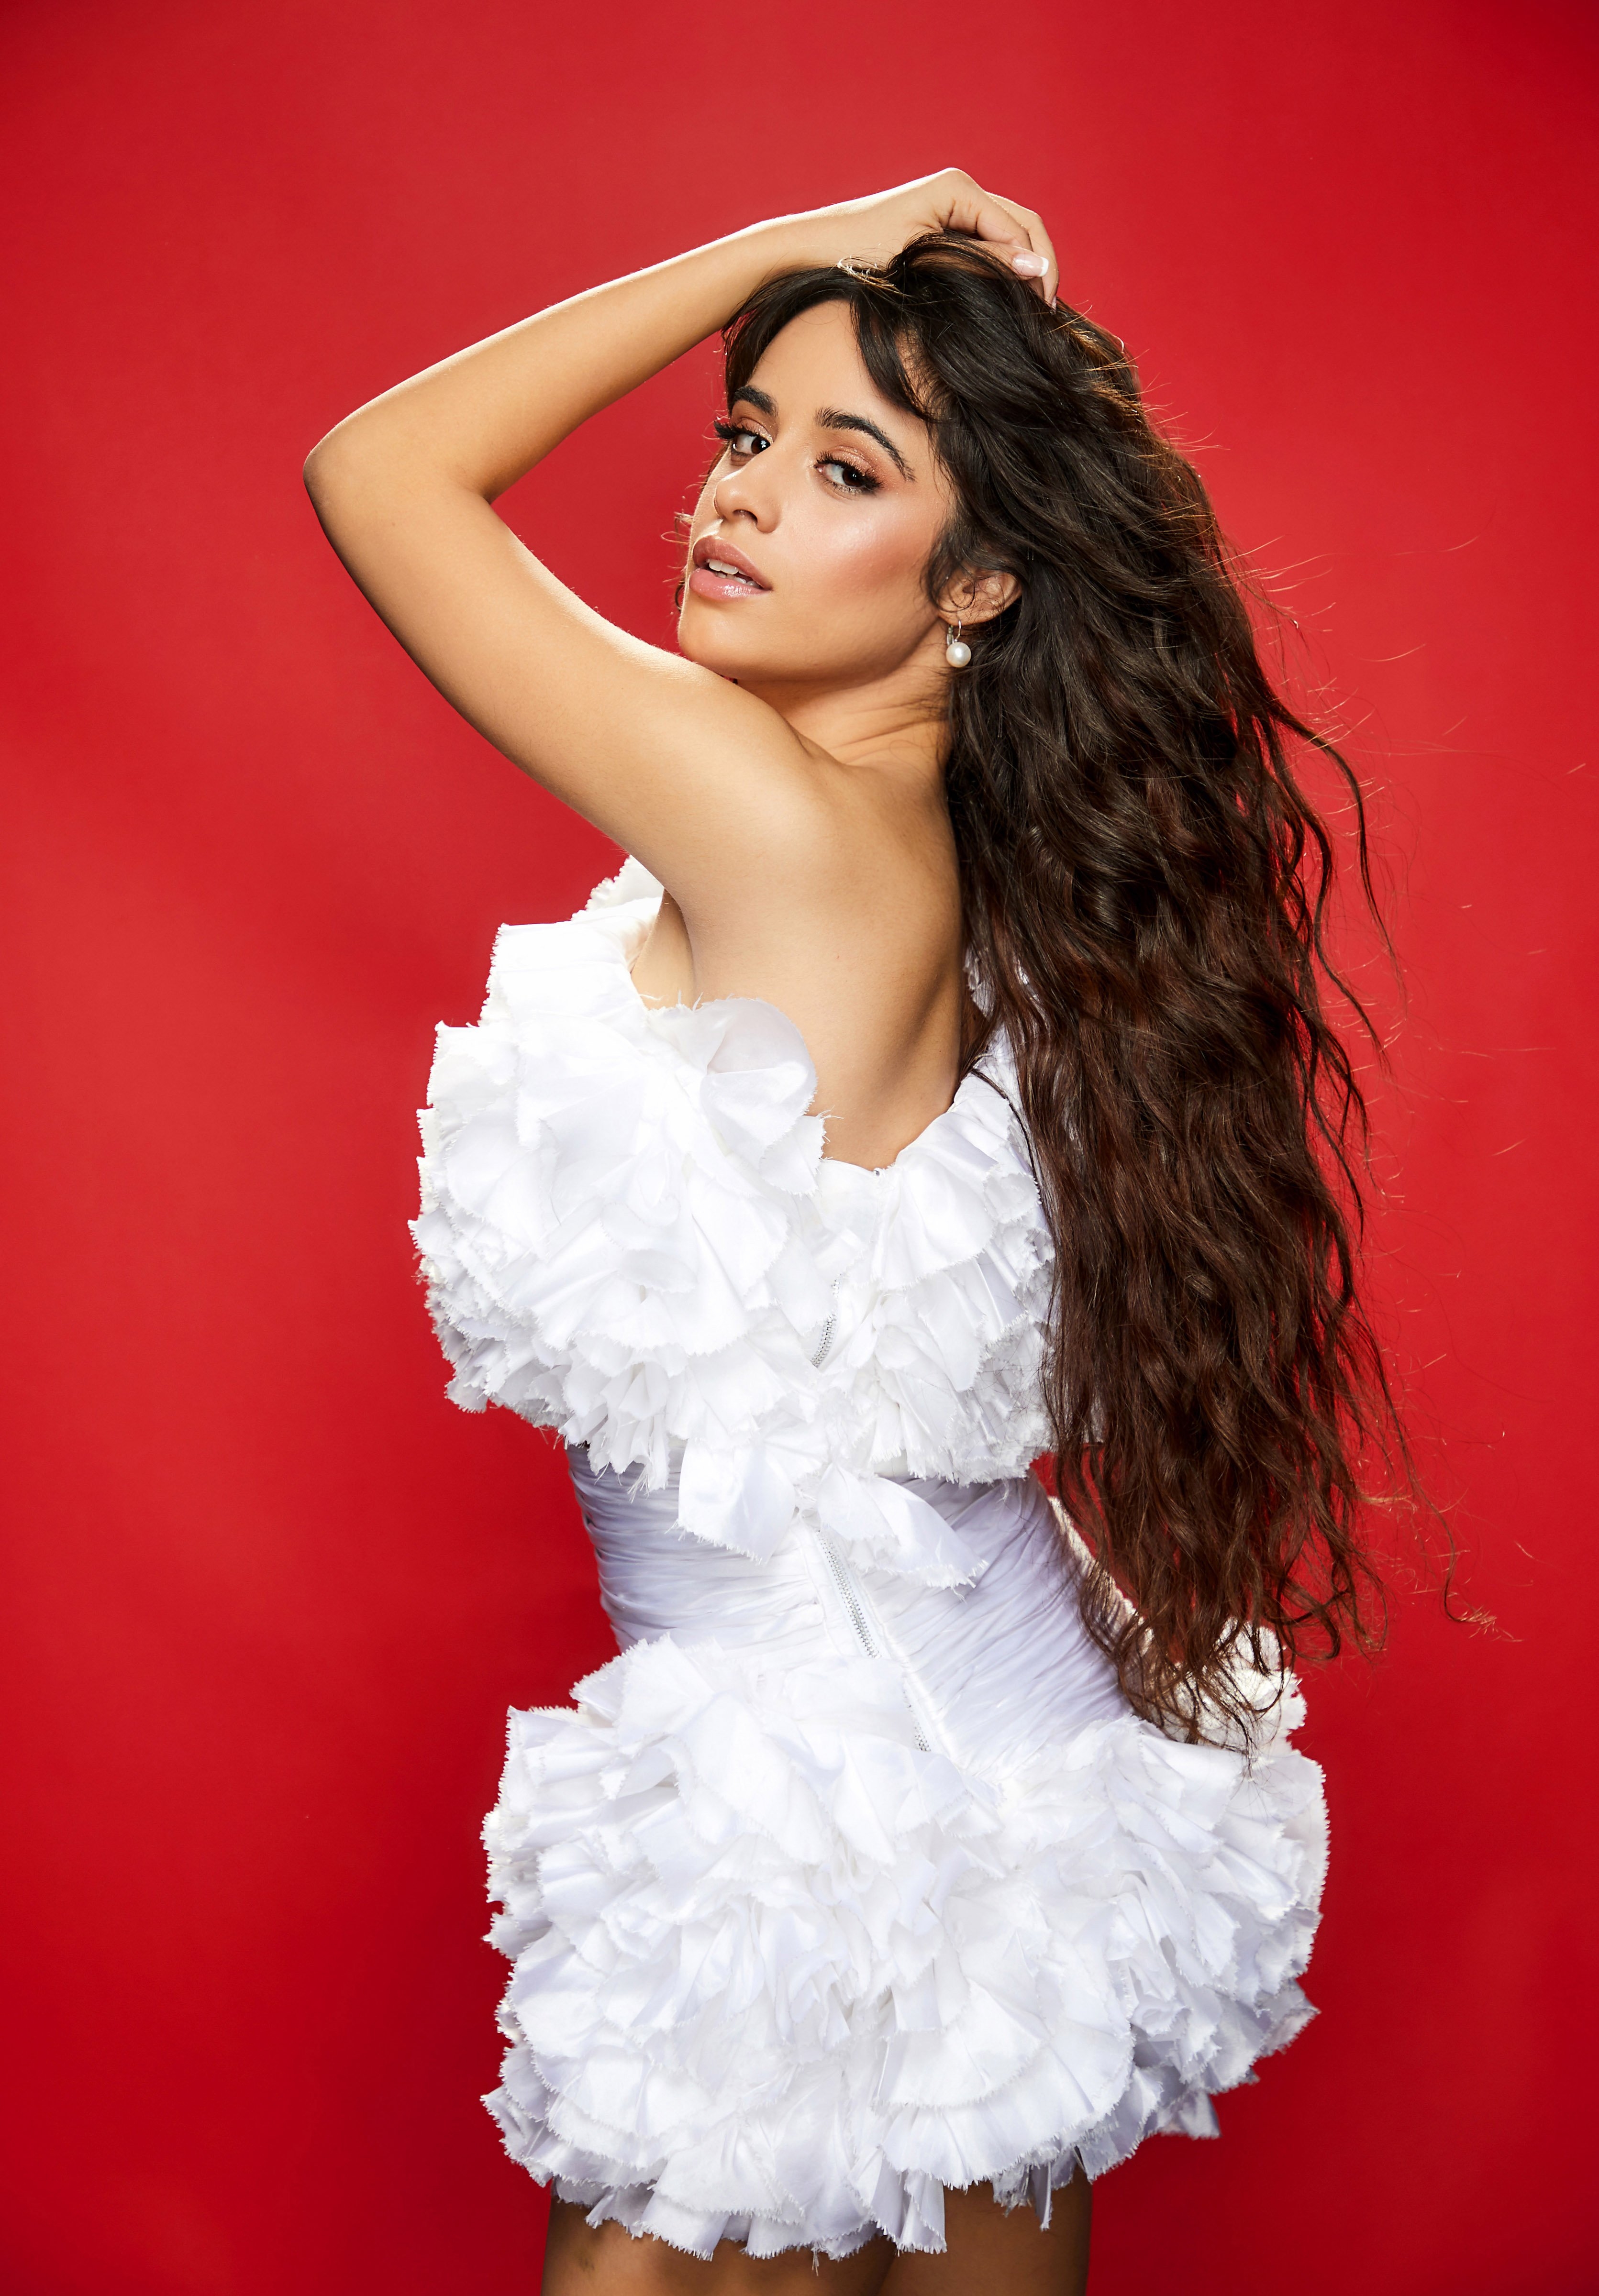 Camila Cabello 2019 Wallpaper, HD Celebrities 4K Wallpapers, Images, Photos  and Background - Wallpapers Den